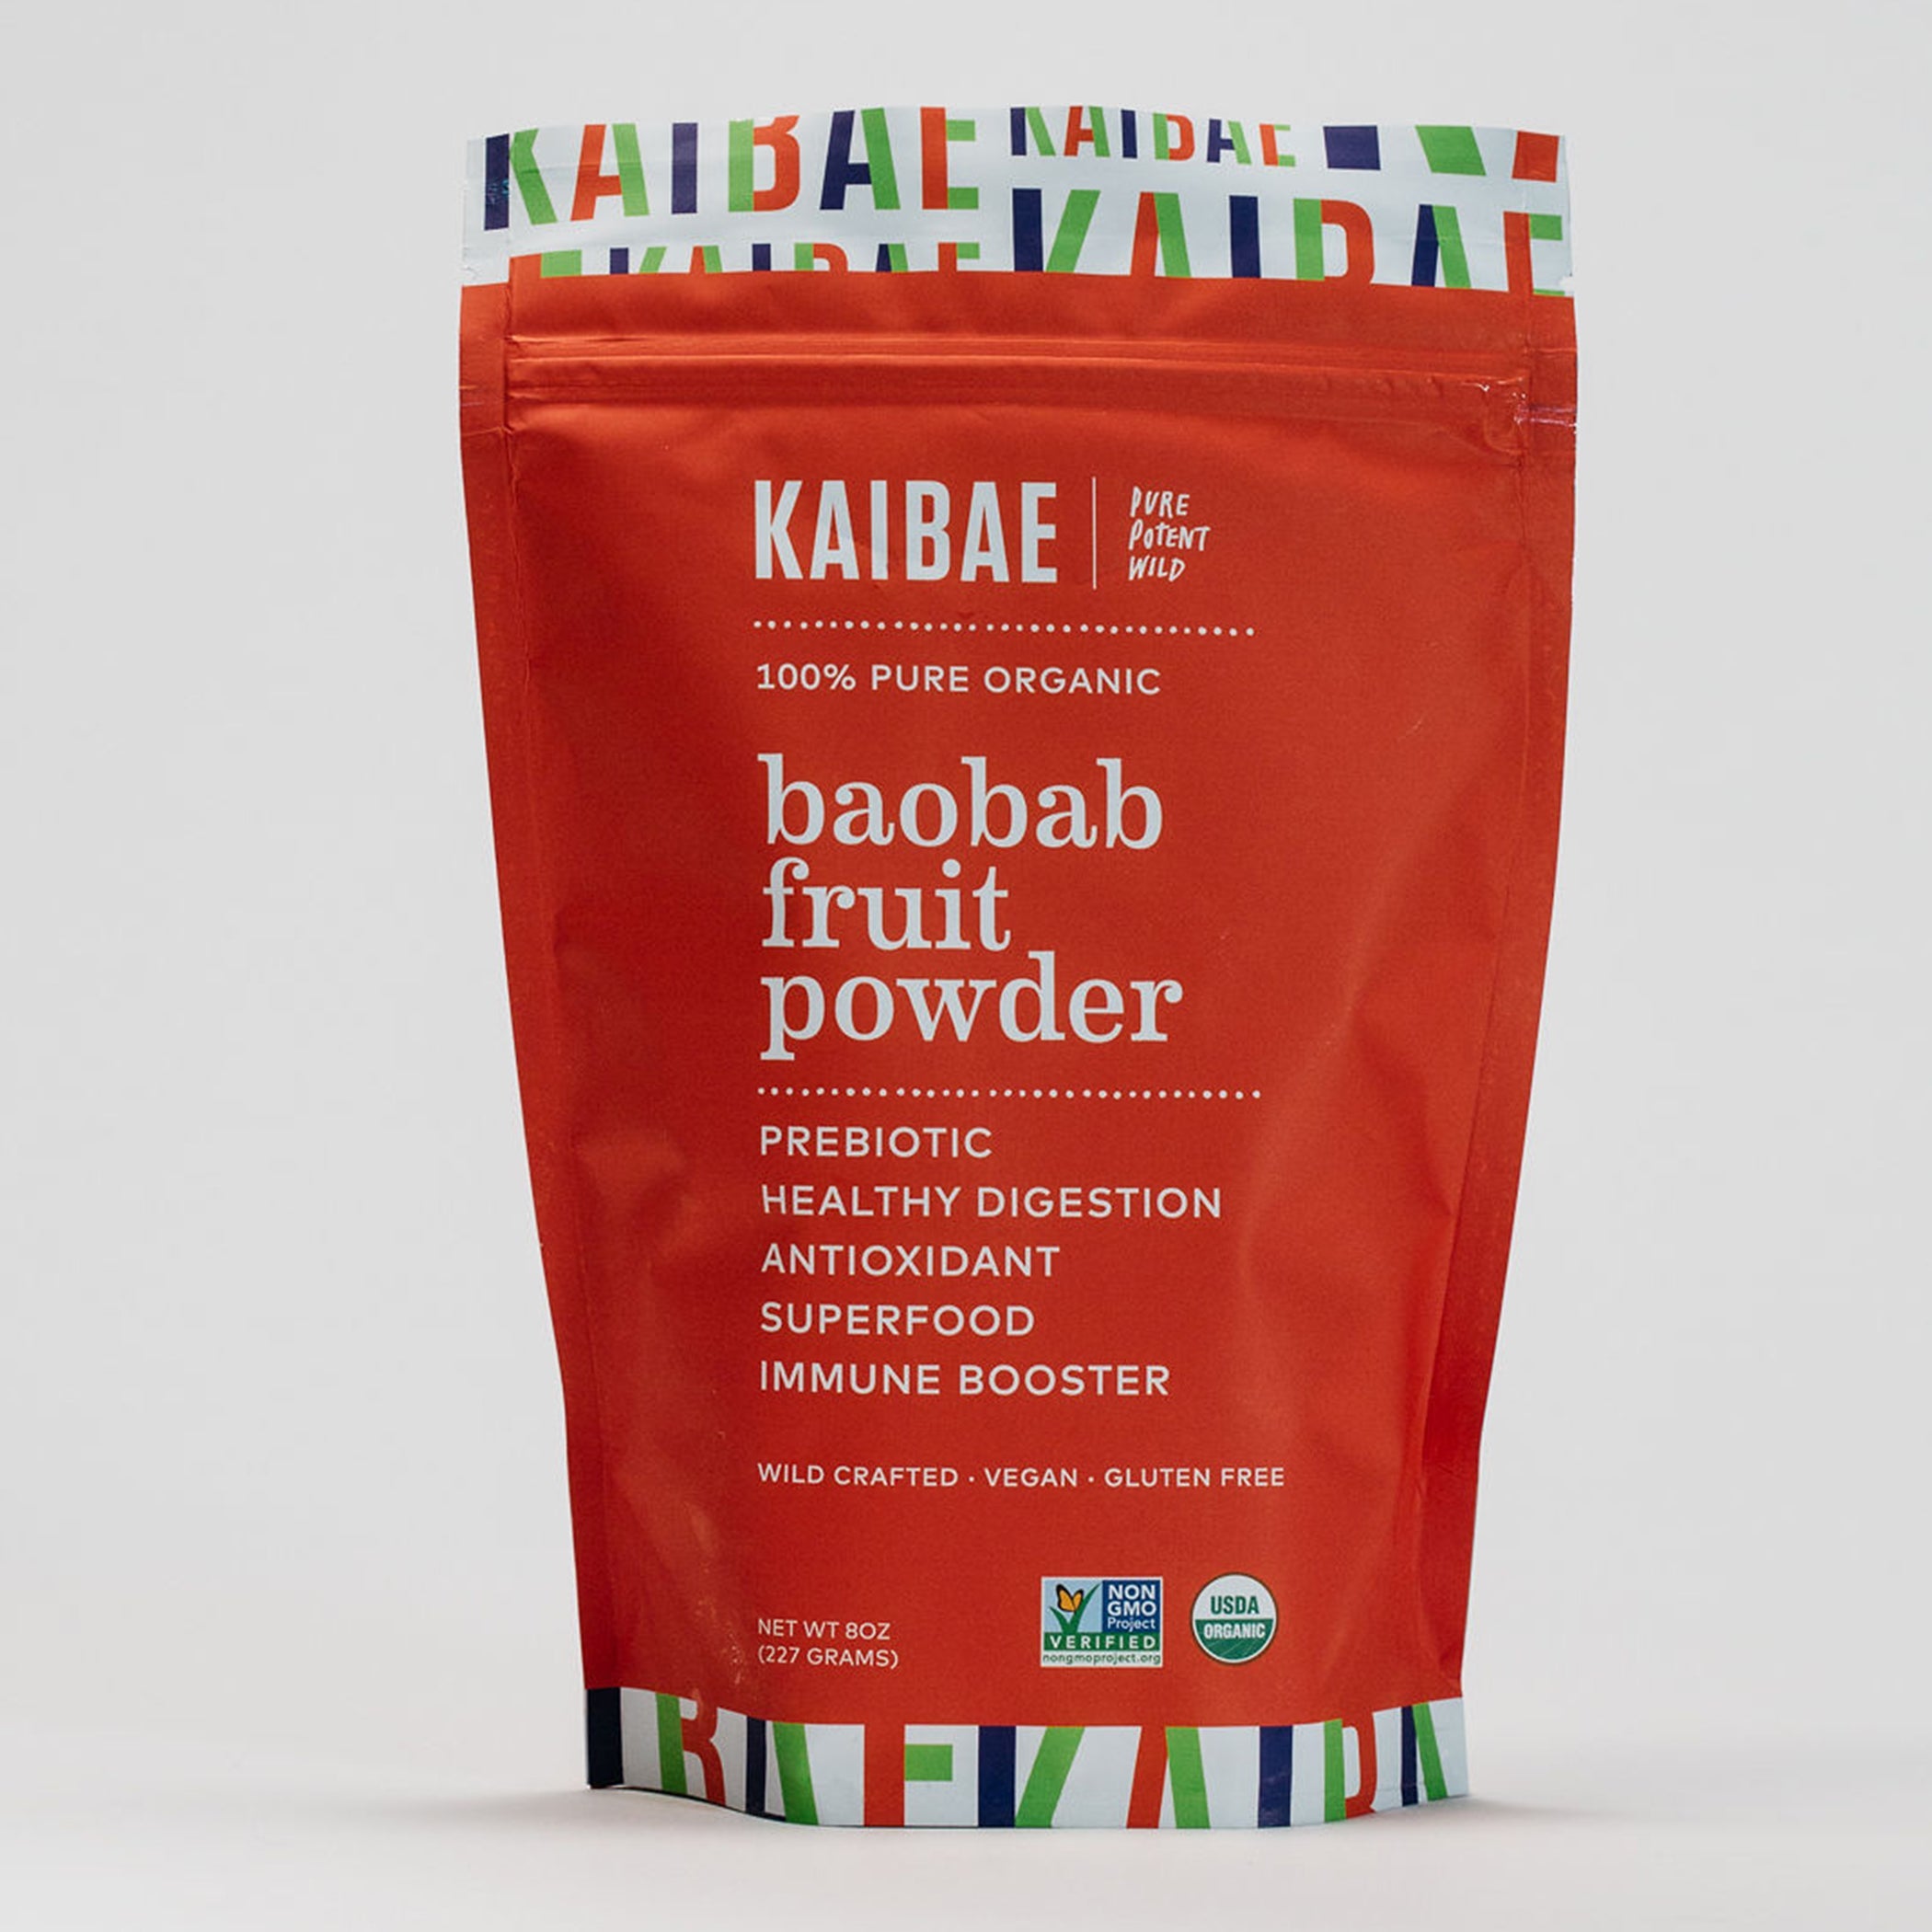 A red, resealable bag of KAIBAE baobab powder, 5 single sticks is displayed against a white background. The bag emphasizes its 100% organic, prebiotic super fiber, antioxidant, and gut health-boosting properties. It is labeled as vegan, gluten-free, and USDA Organic certified.